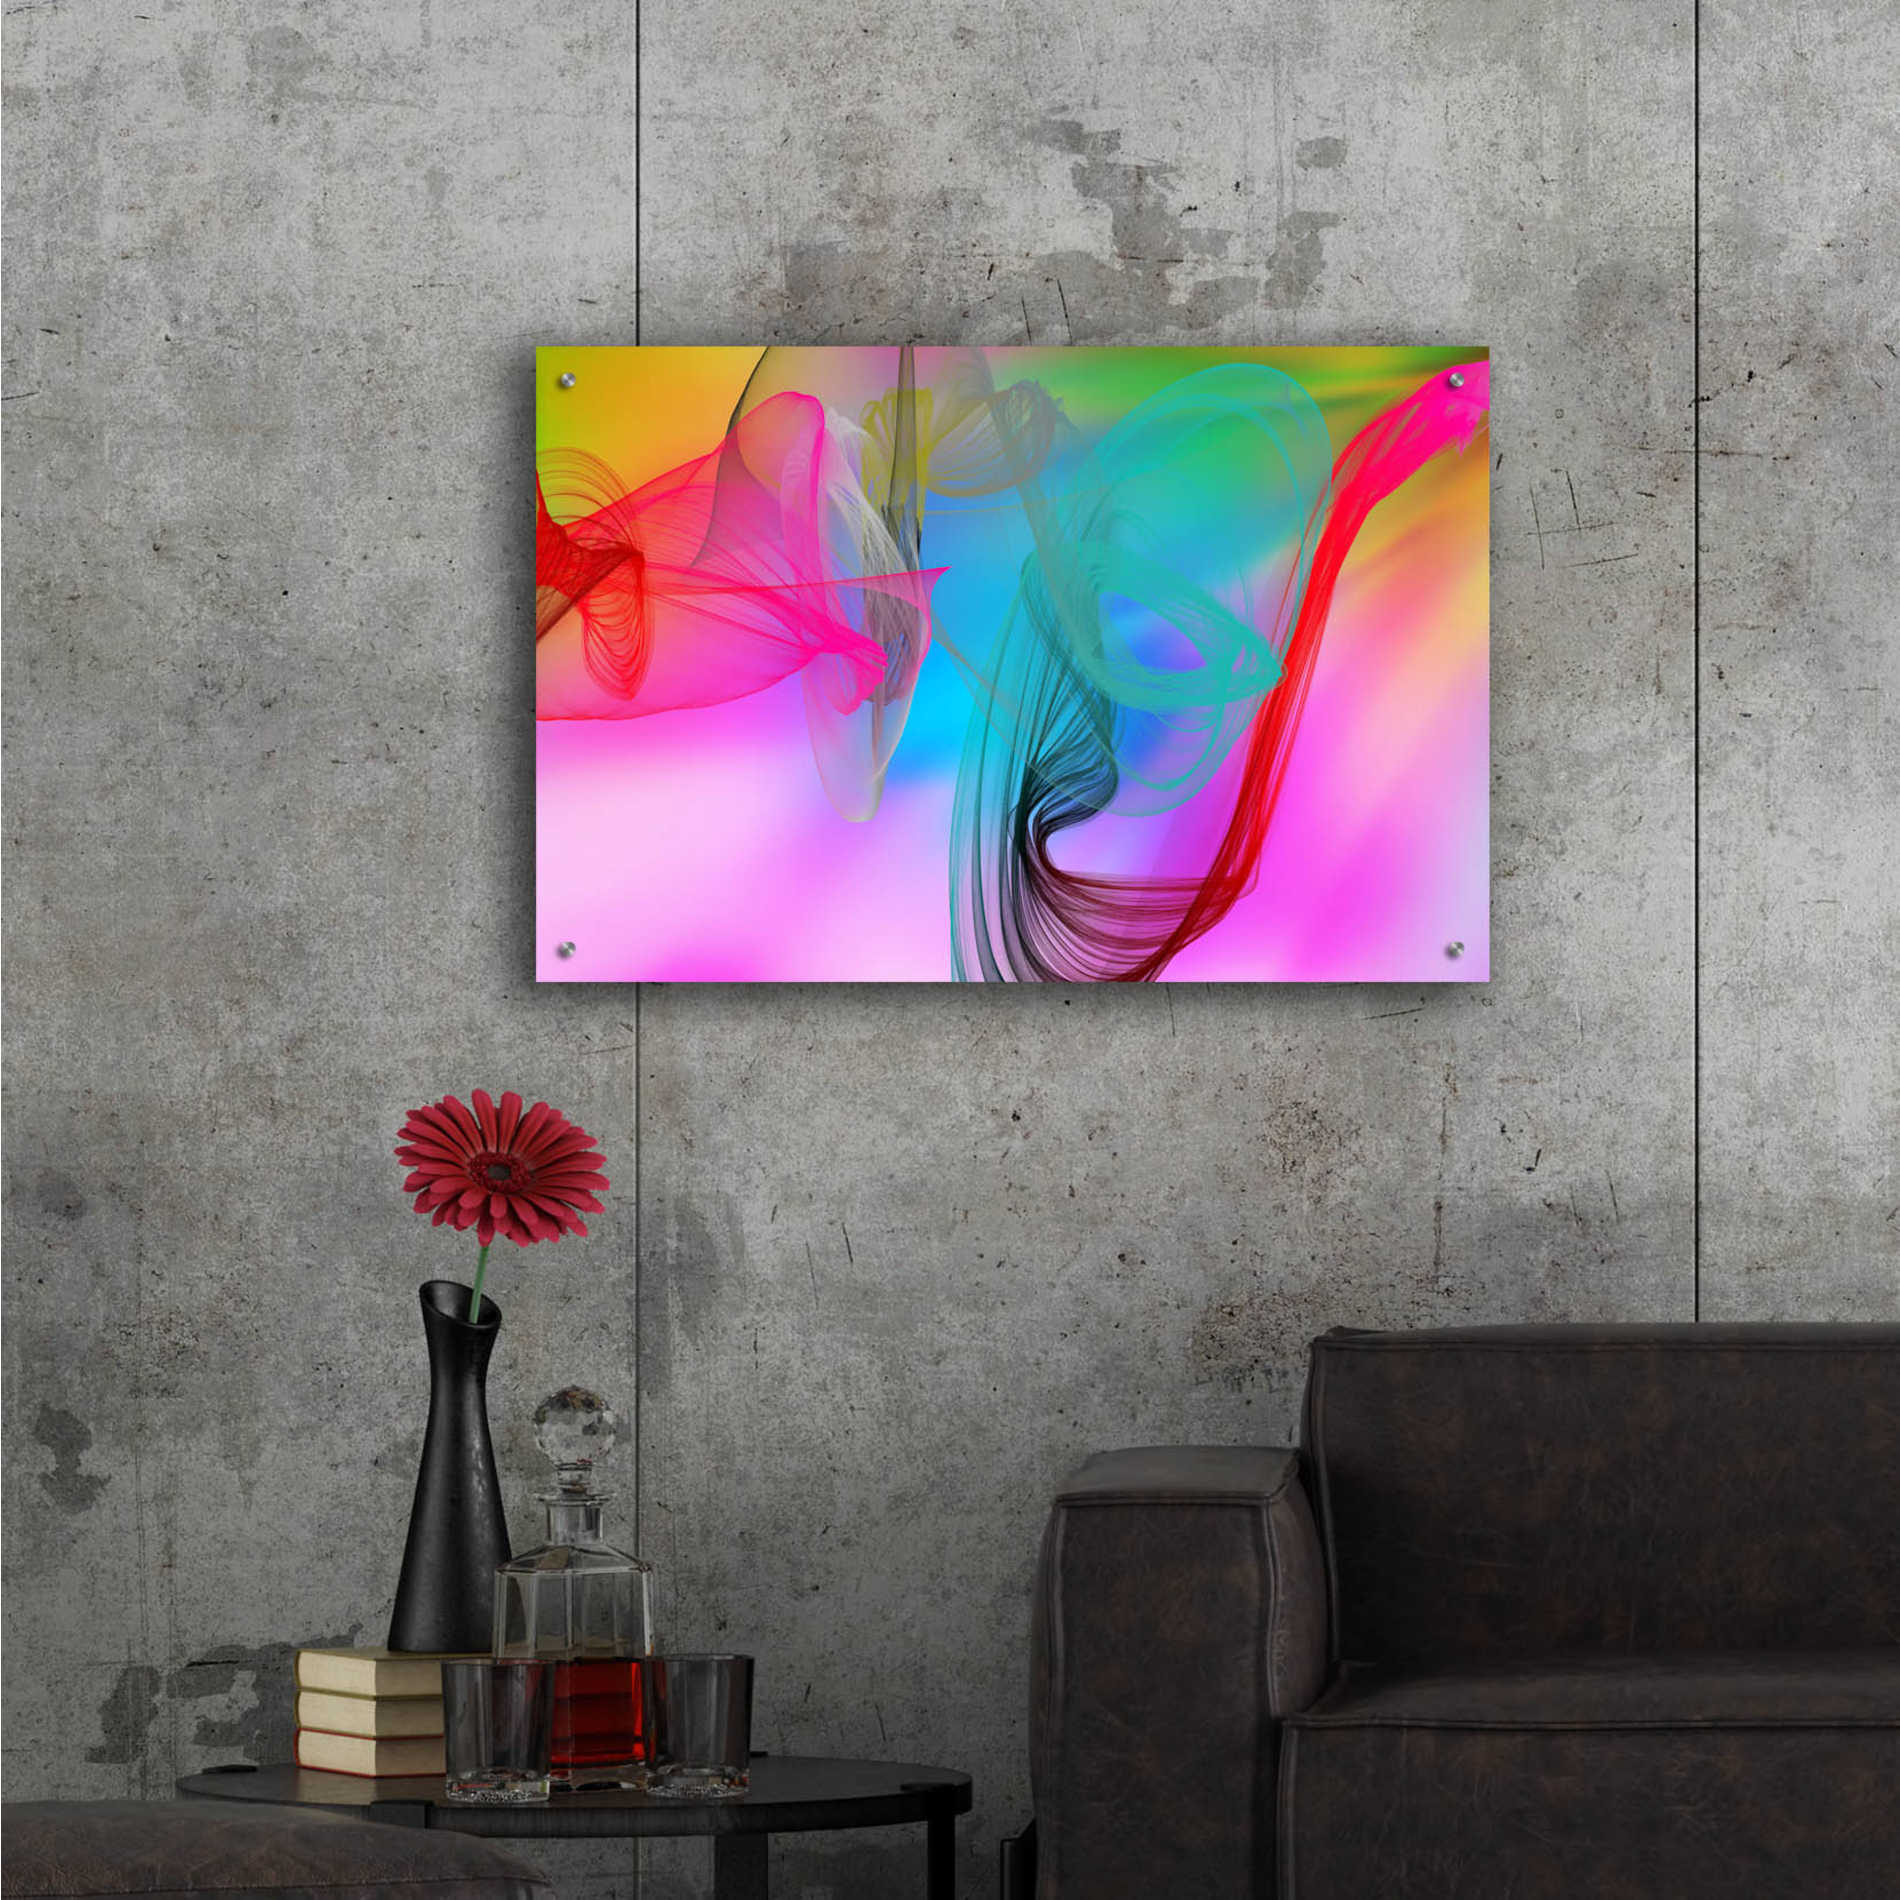 Epic Art 'Color In The Lines 8' by Irena Orlov Acrylic Glass Wall Art,36x24